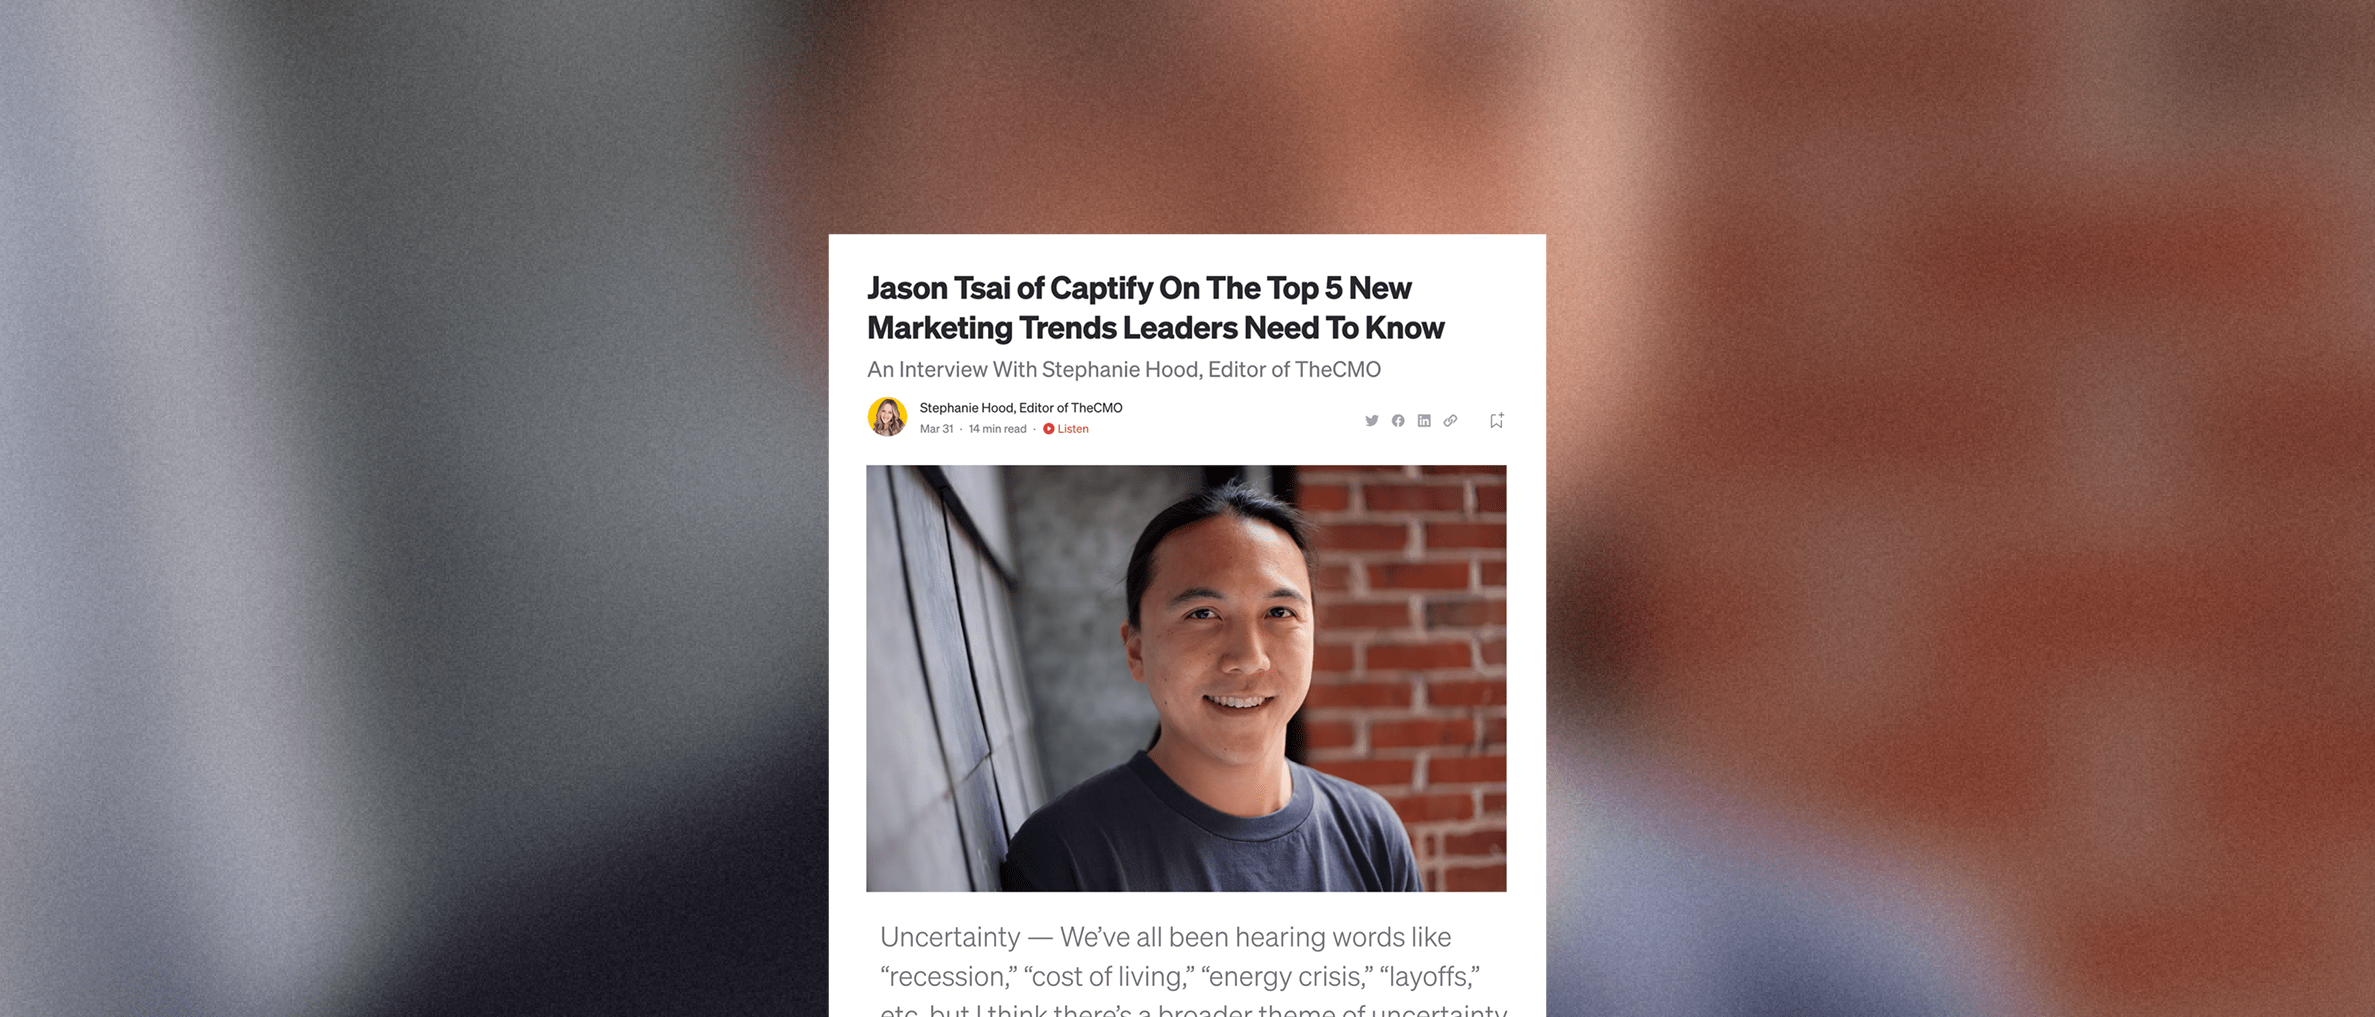 Authority Magazine: Captify’s Jason Tsai On The Top 5 New Marketing Trends Leaders Need To Know